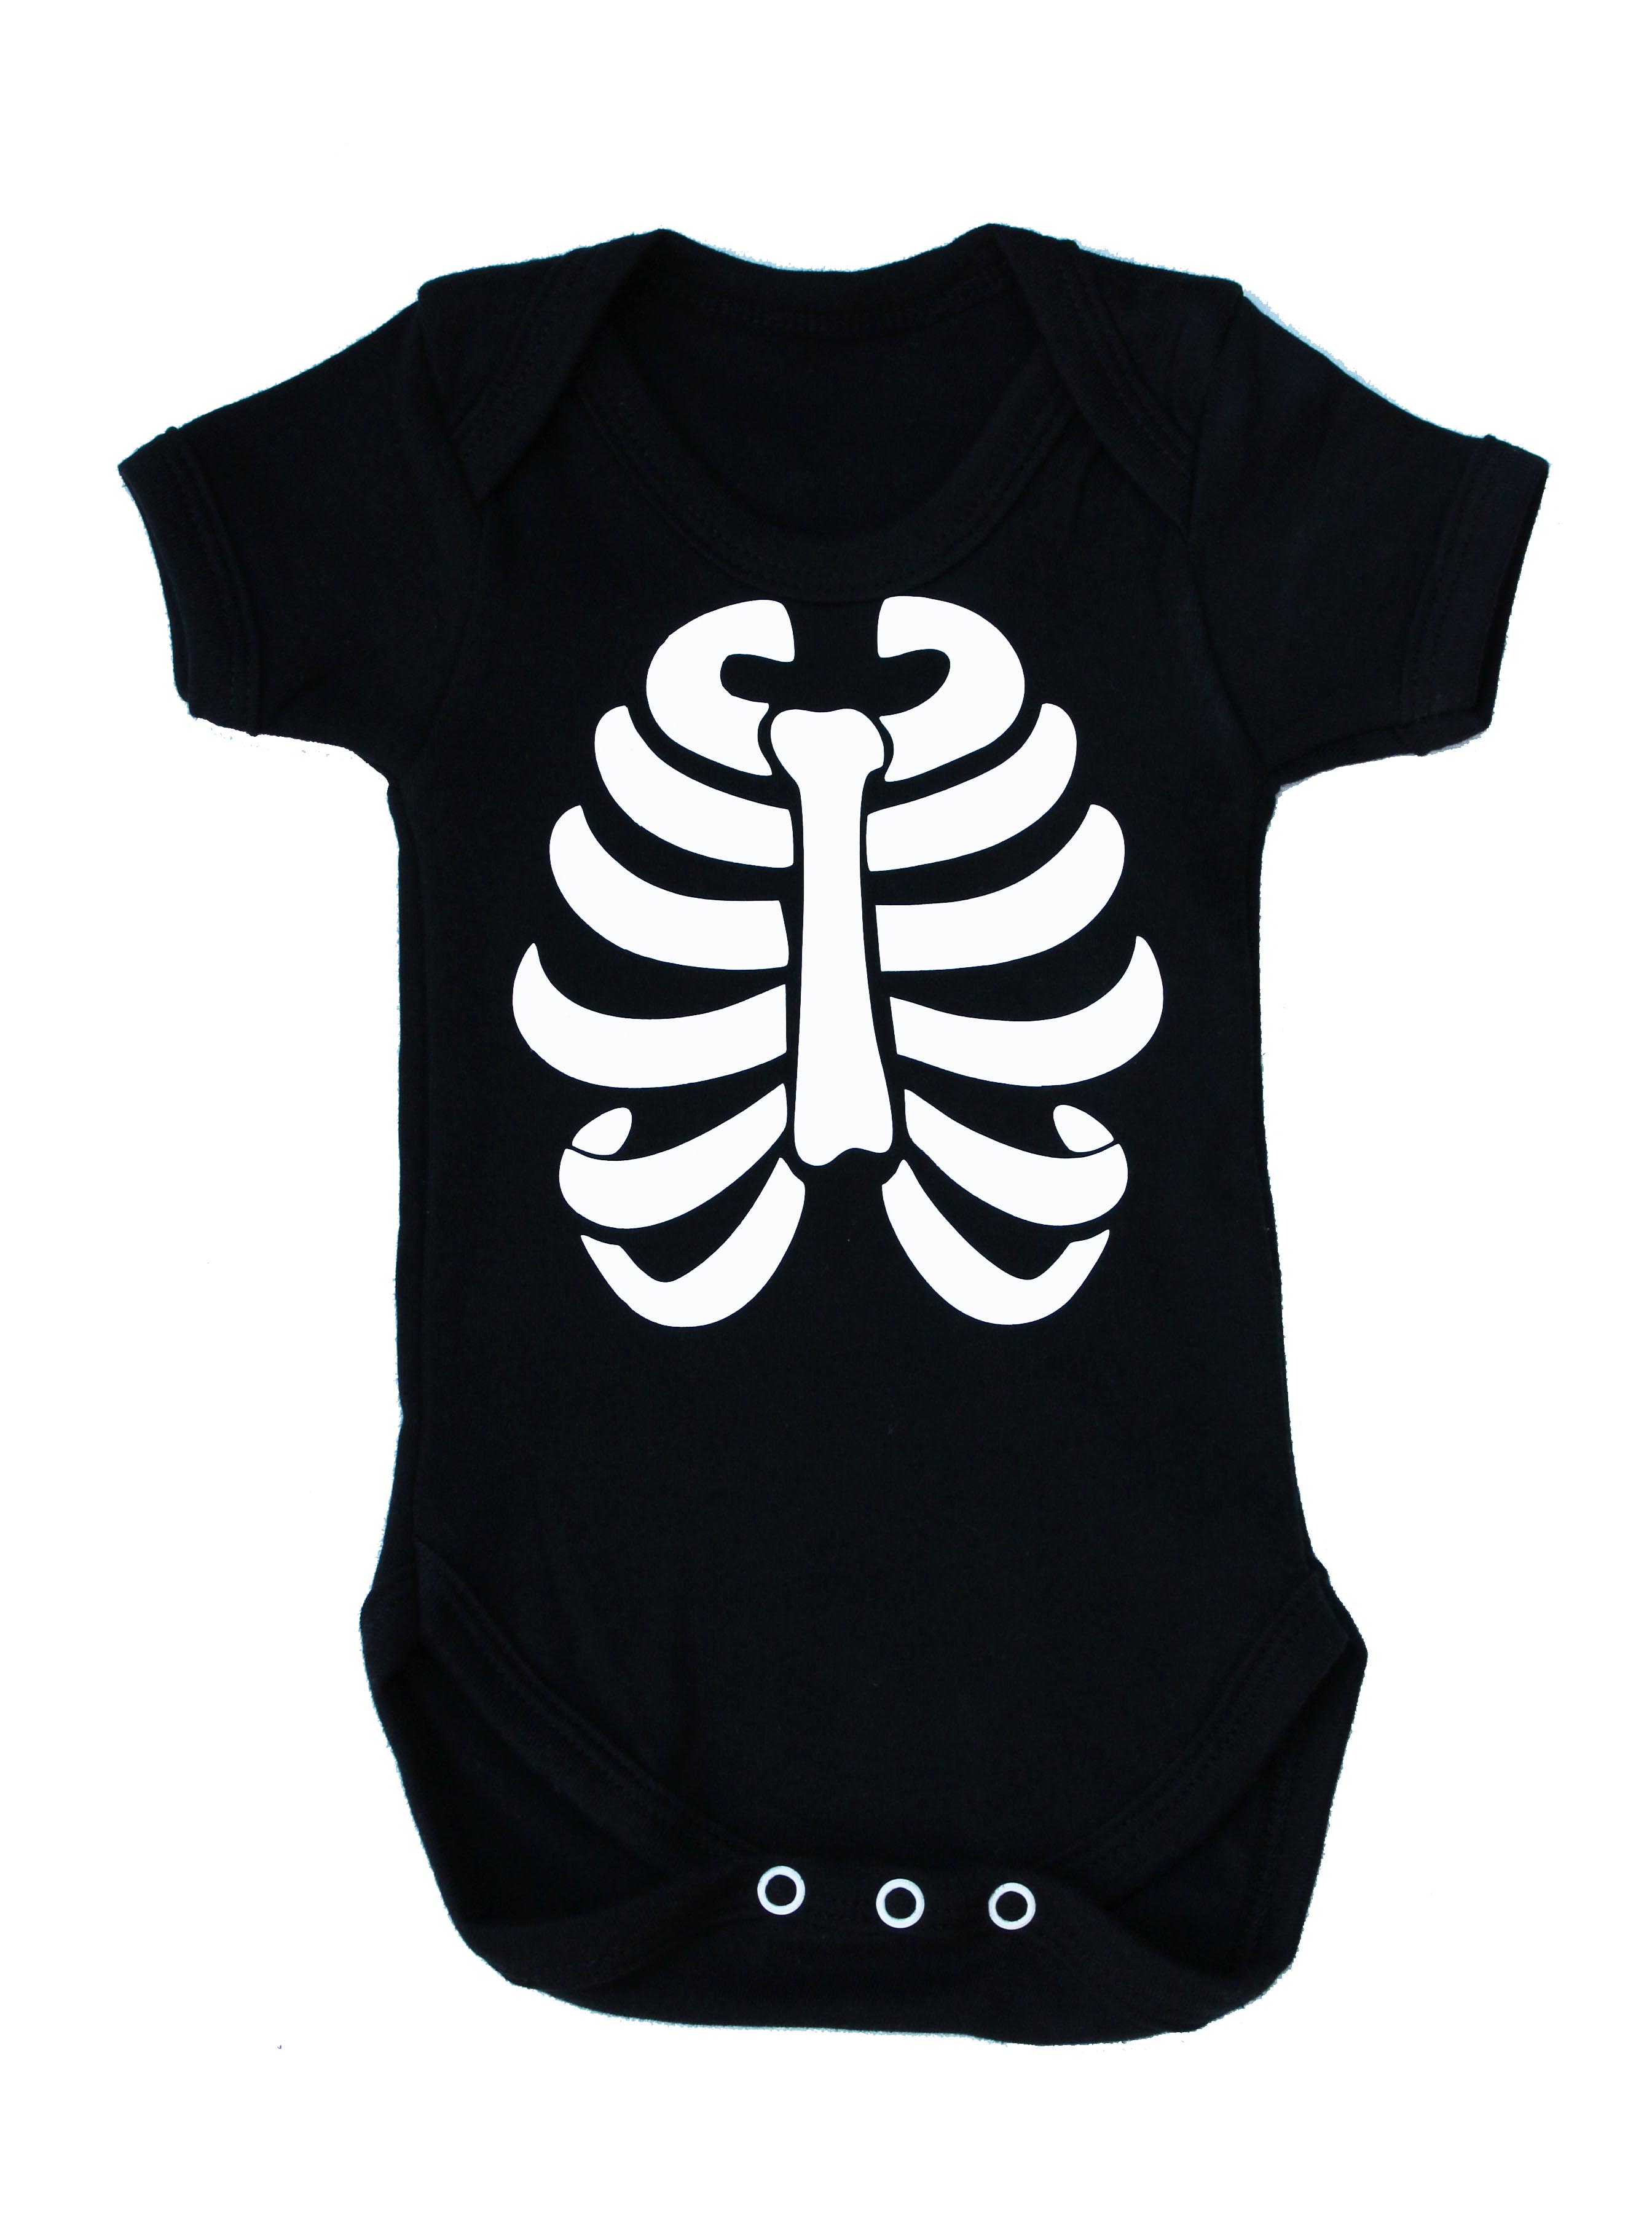 Baby Vest Alternative Baby Clothes Uk Cool Baby Clothes Halloween Jpg